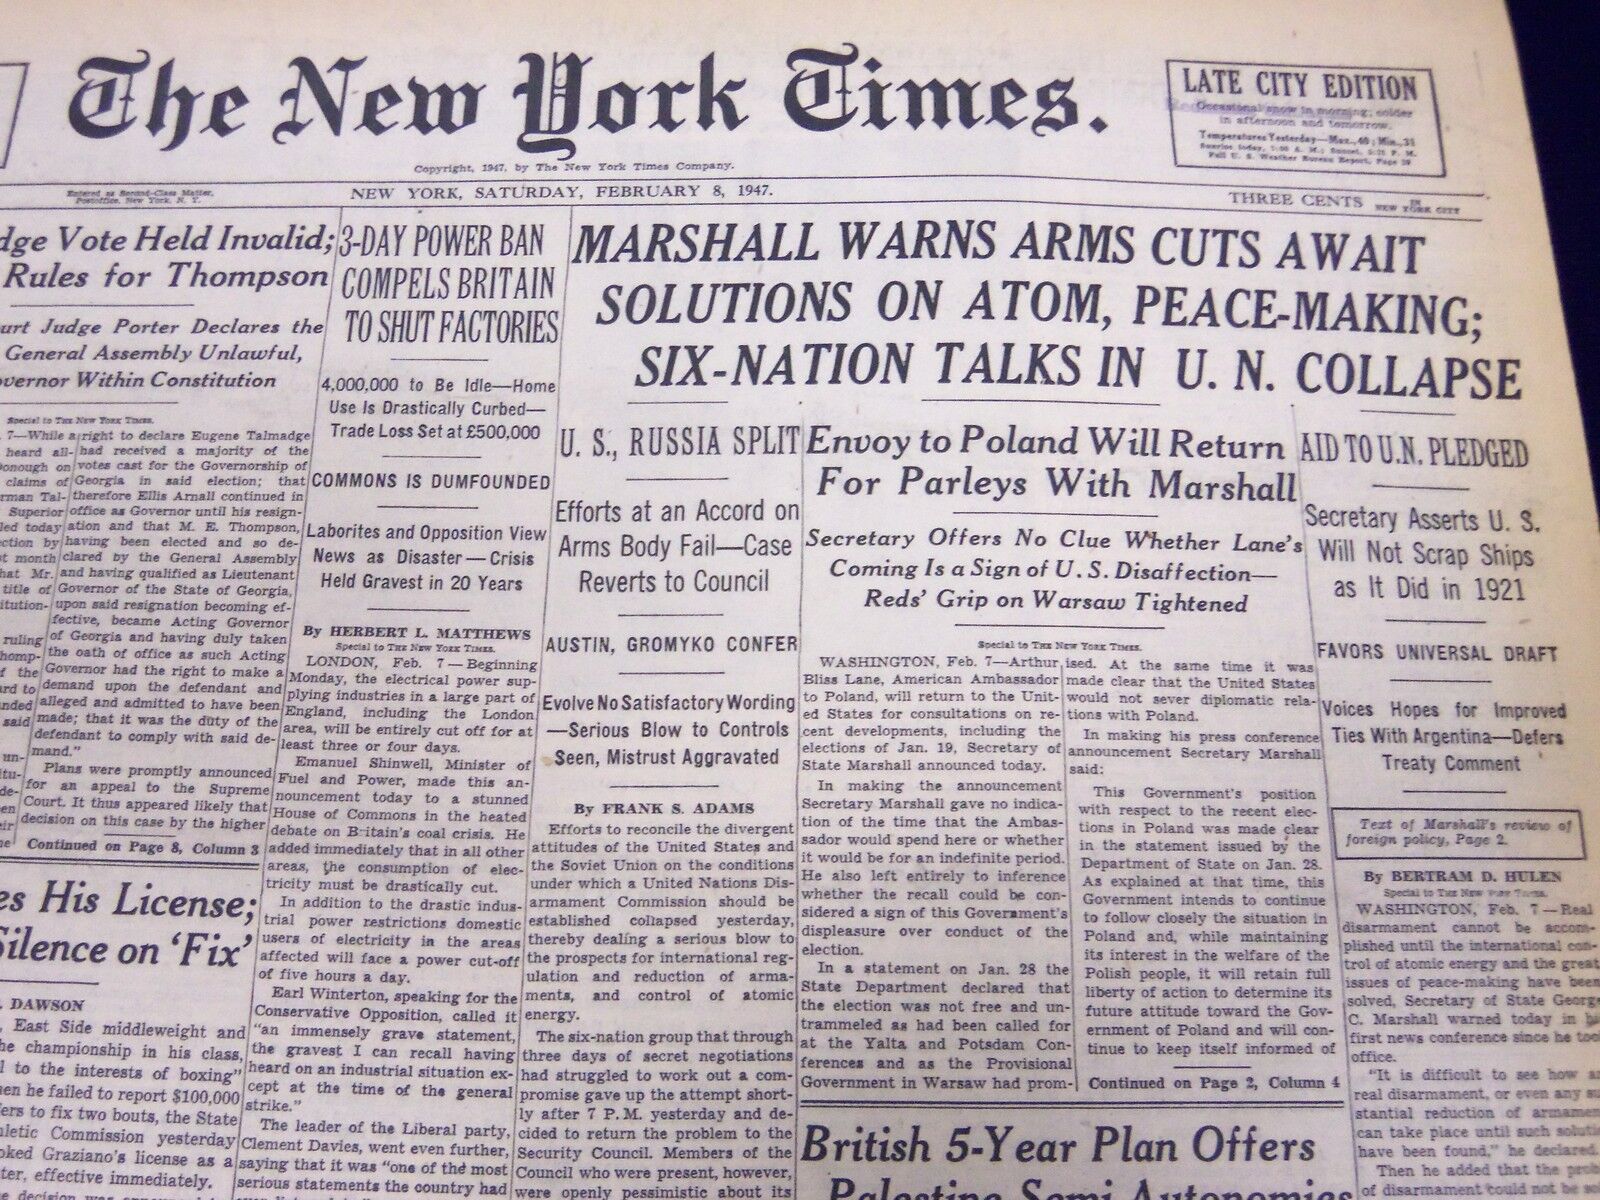 1947 FEB 8 NEW YORK TIMES - MARSHALL WARNS ARMS CUTS AWAIT SOLUTIONS - NT 104